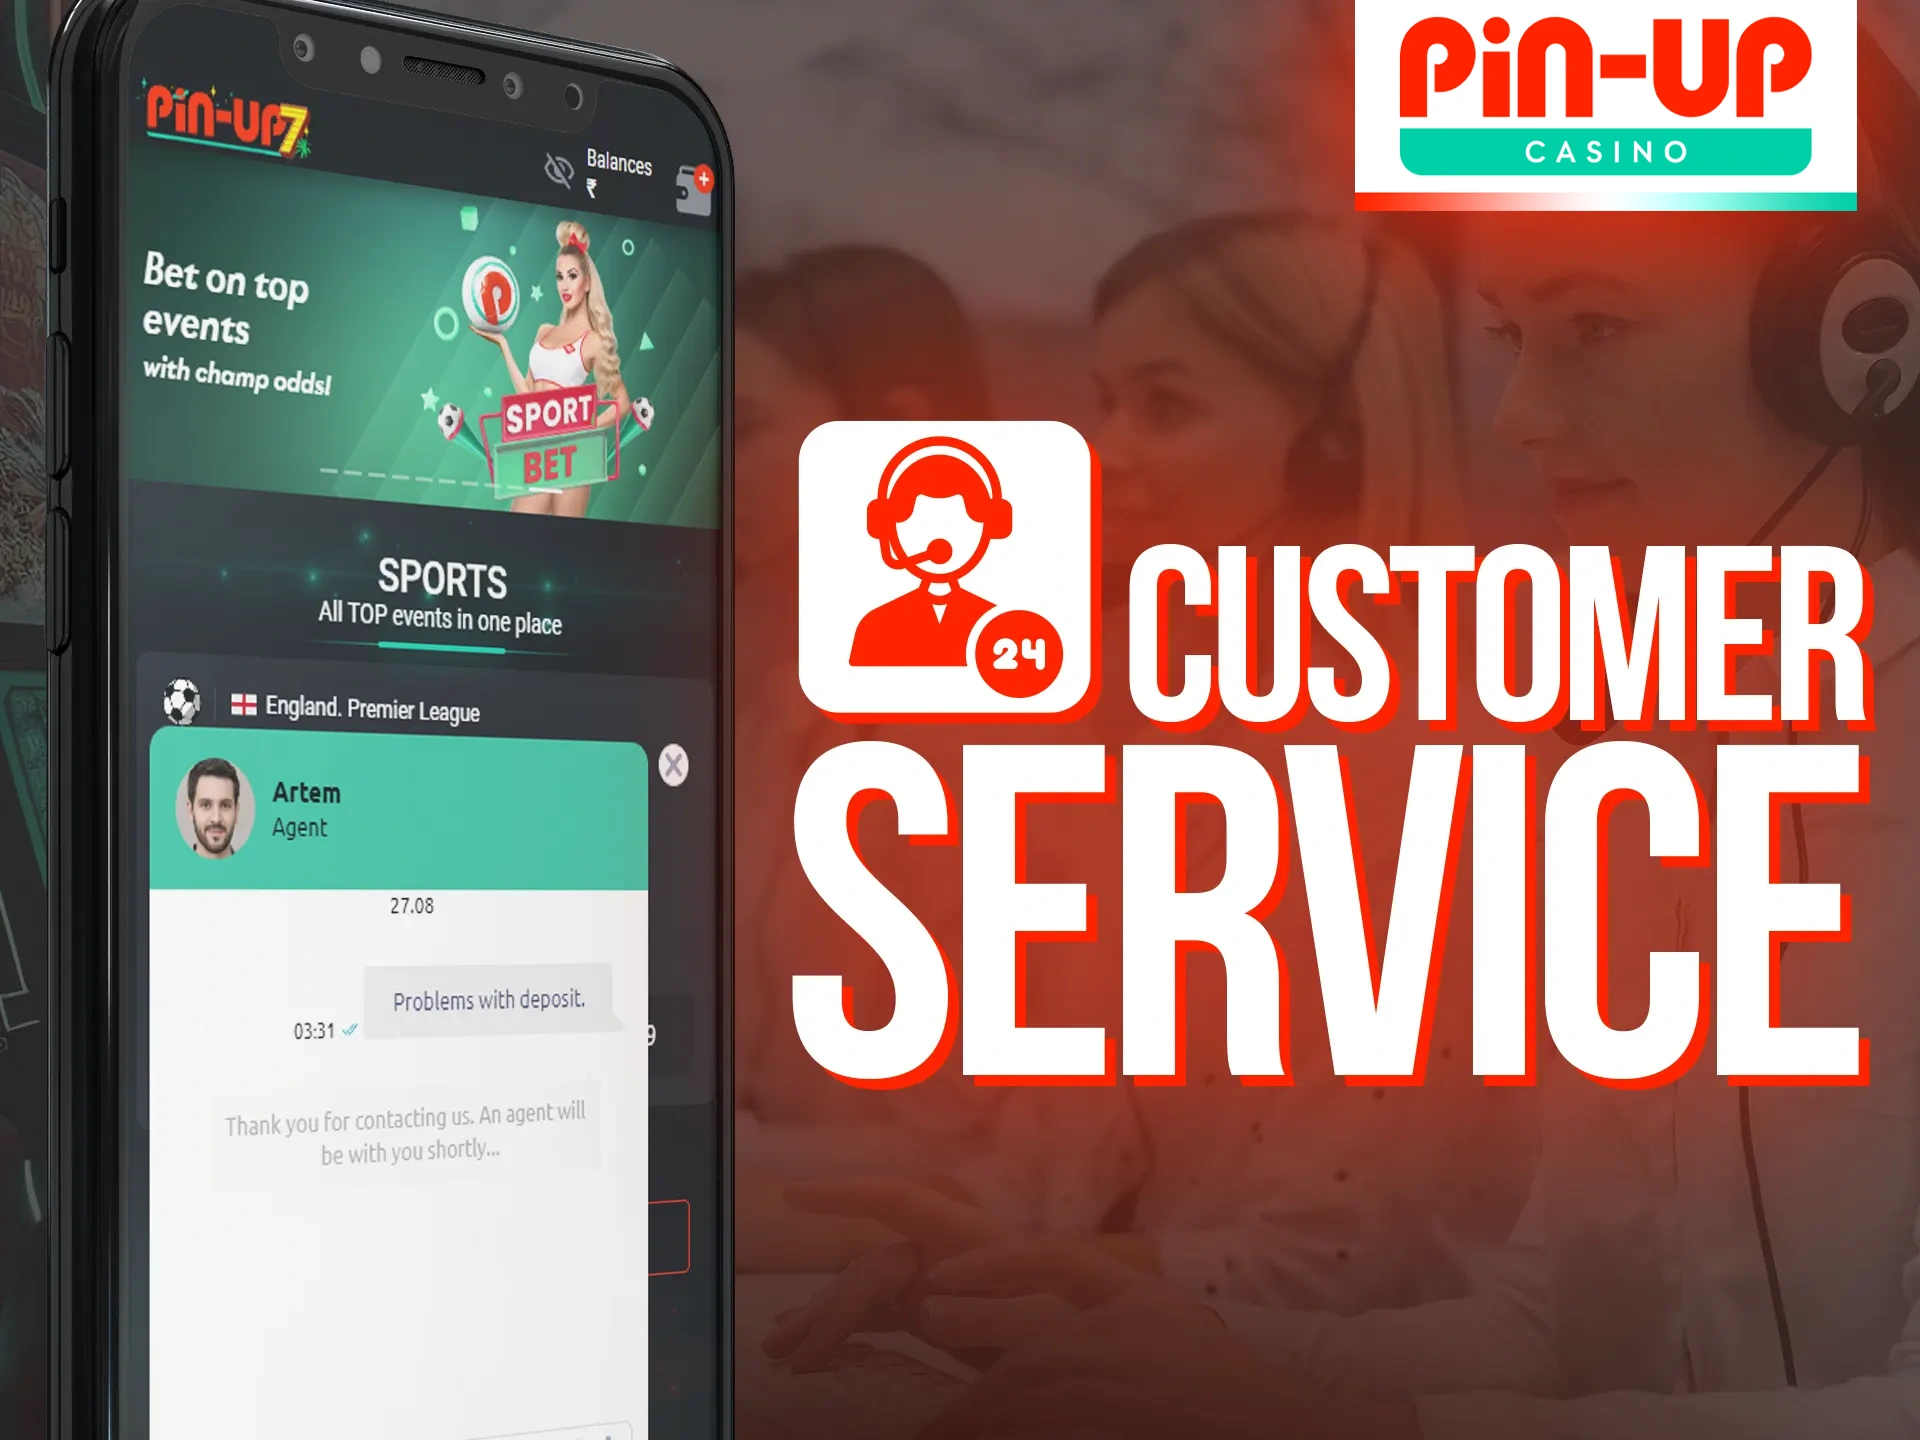 Pin-Up's customer support team is always available to assist you.